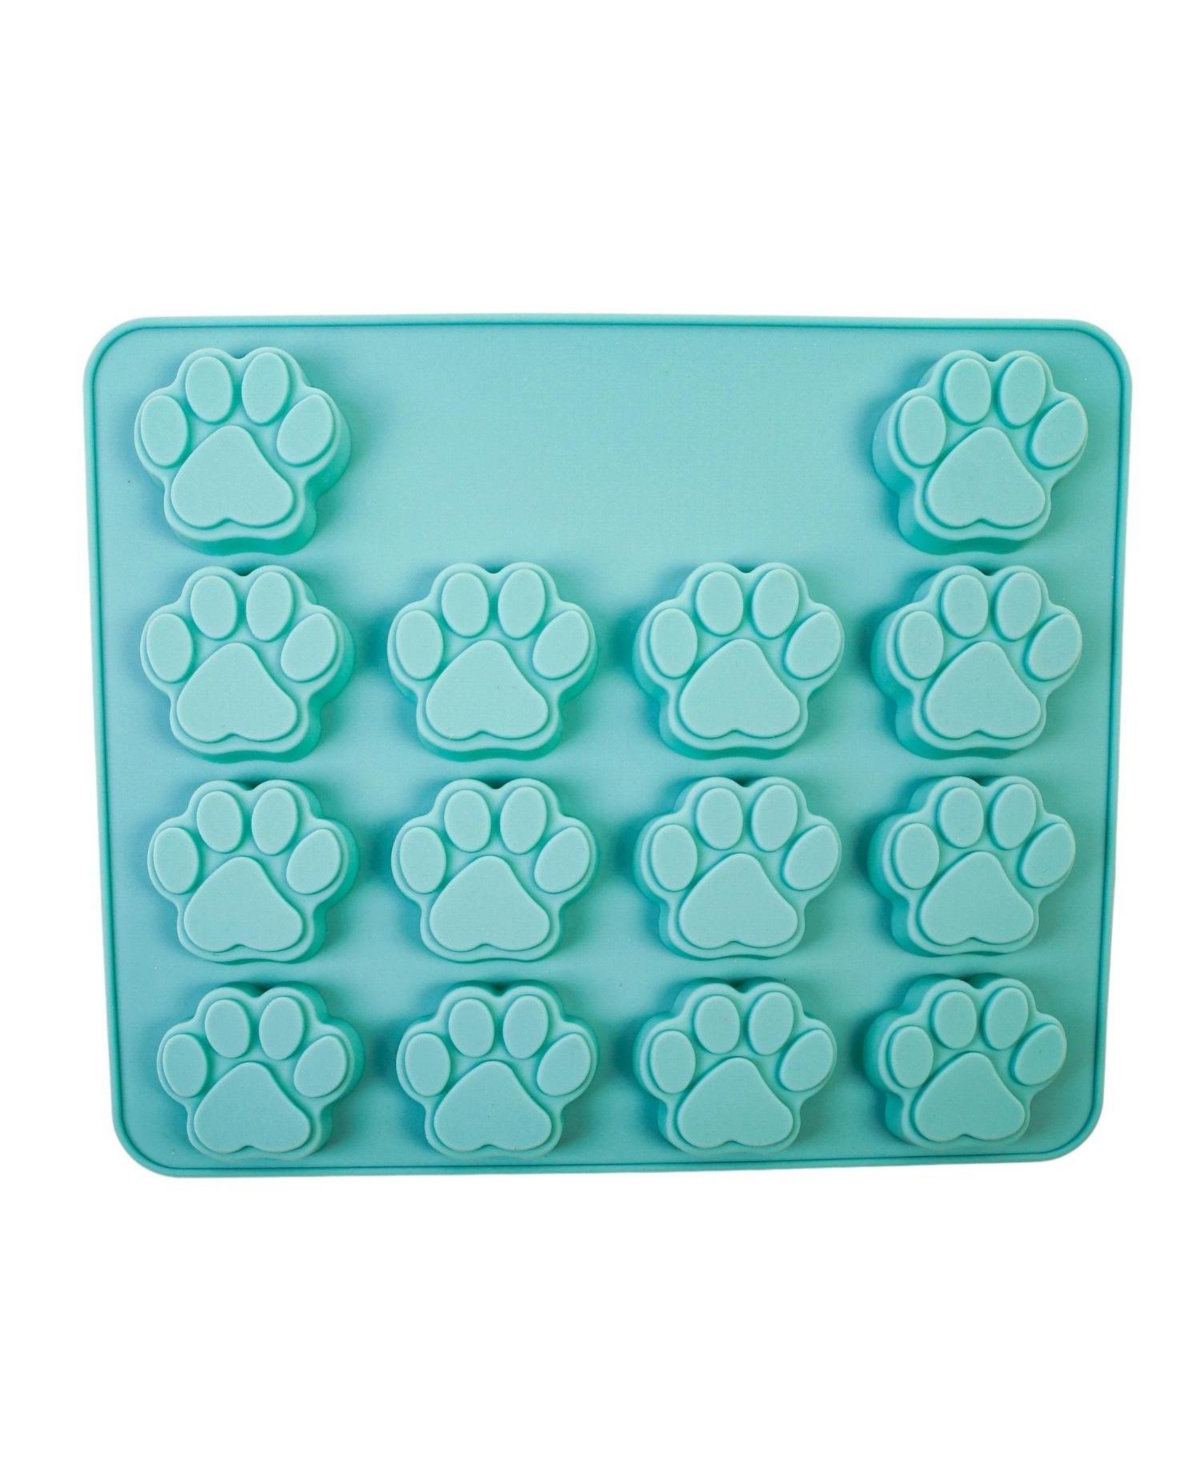 Paw Print 3 in 1 Silicone Baking Treat Tray - Blue